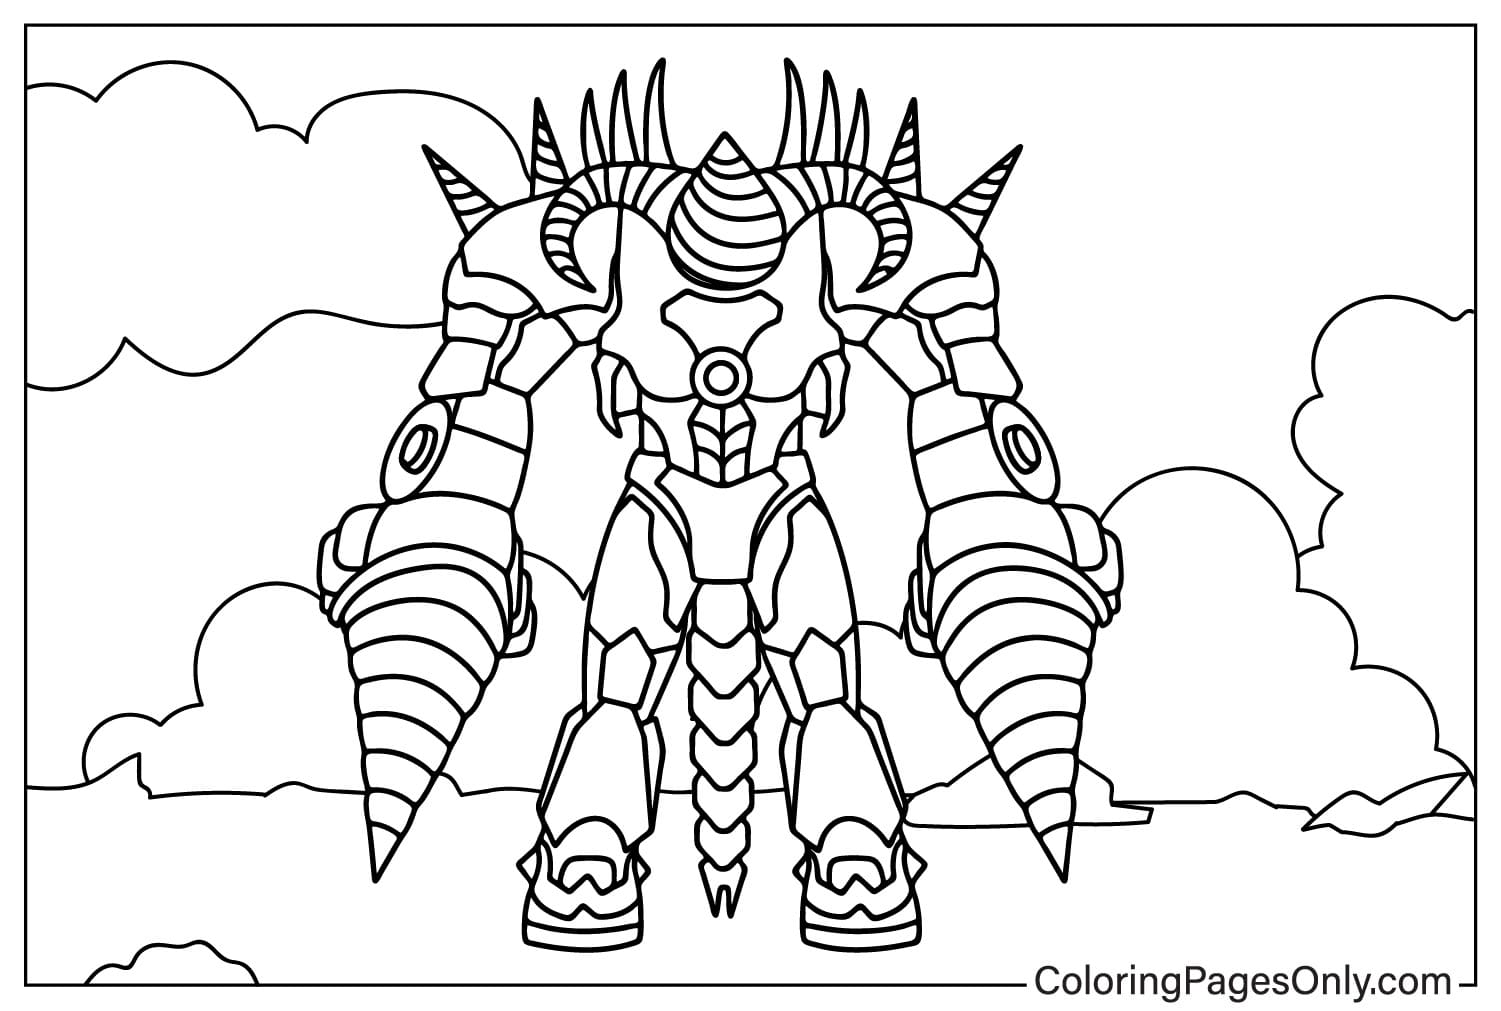 Upgraded Titan Drill Man Free Coloring Page from Upgraded Titan Drill Man